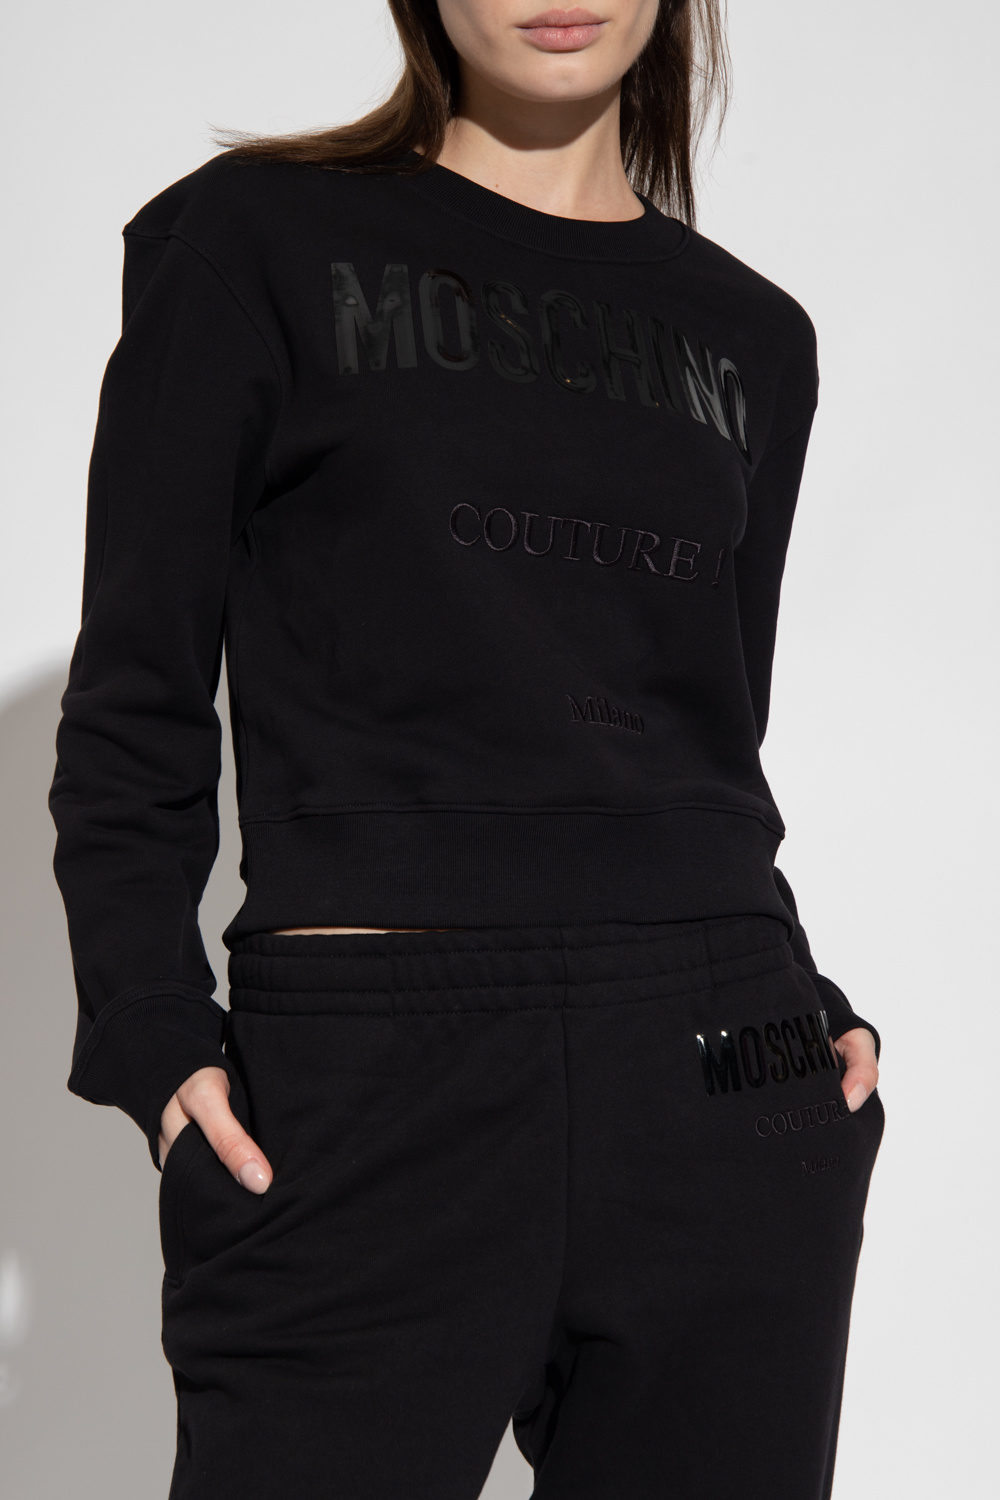 Moschino veronica beard selita leather and shearling cropped jacket